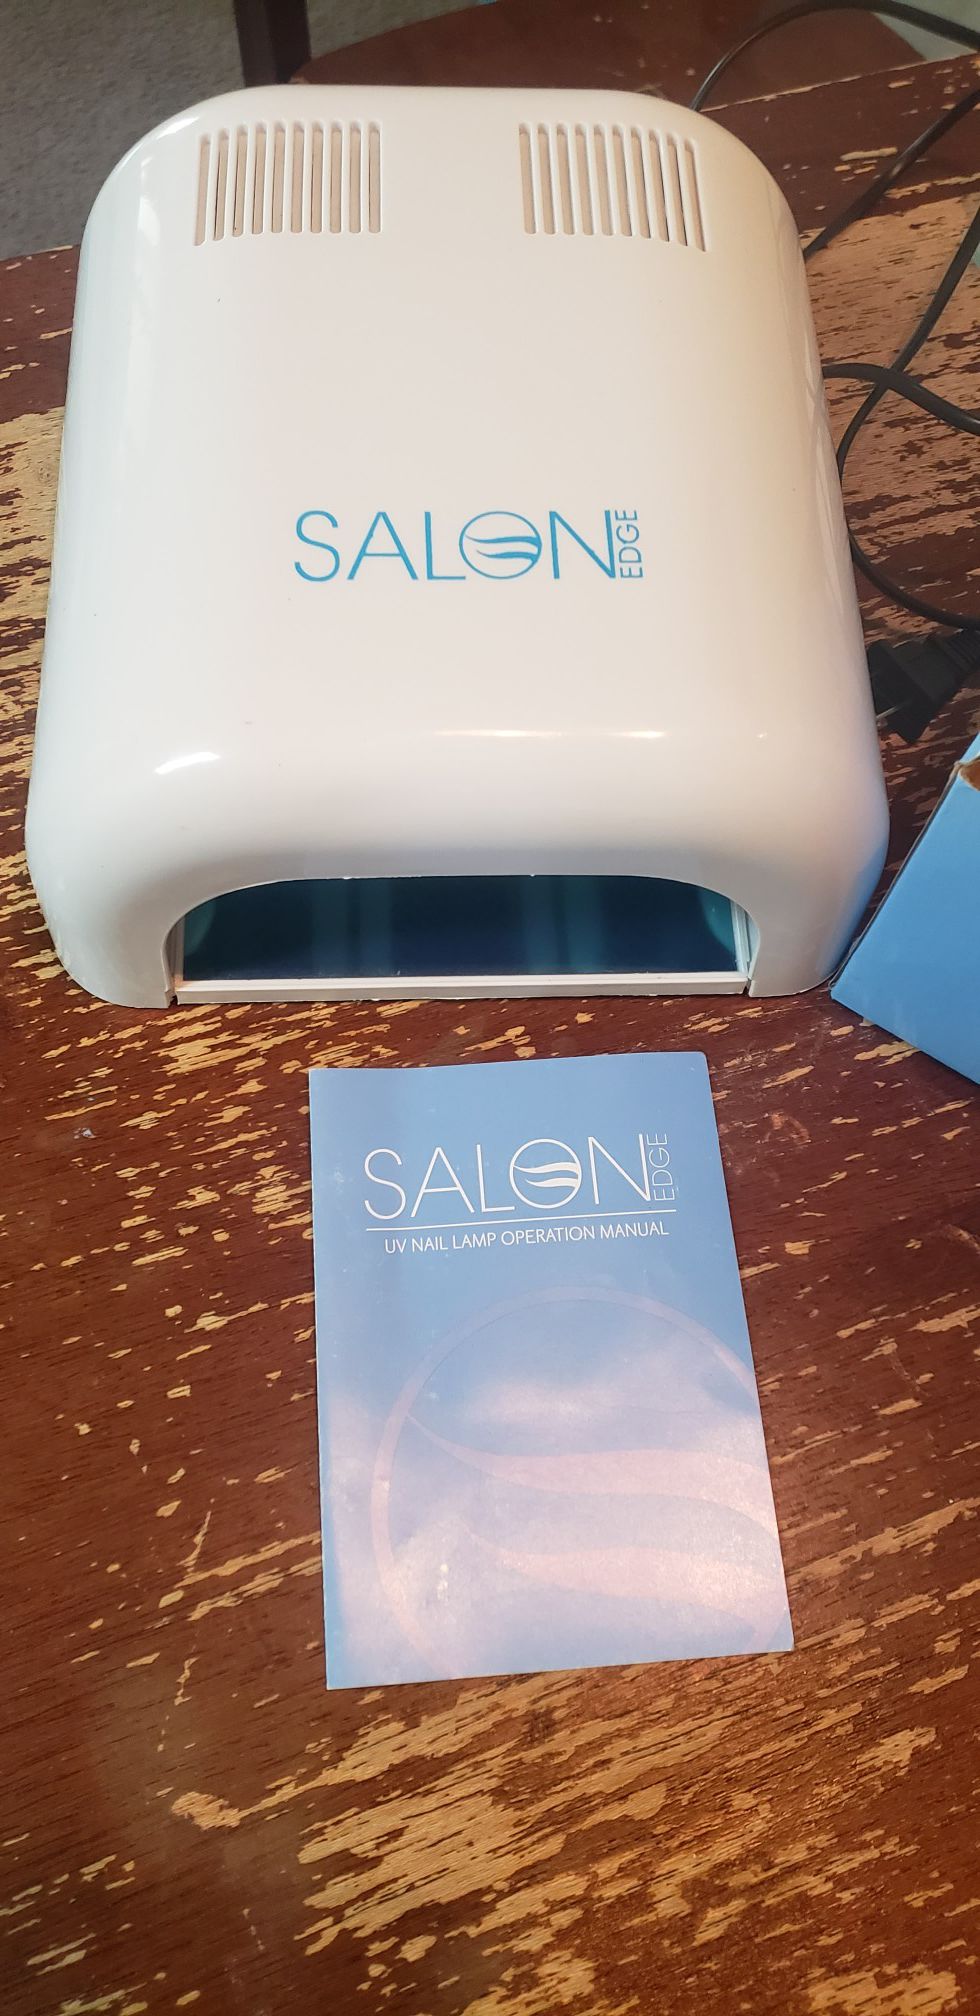 Salon edge 36W professional UV lamp curing and dryer with timer